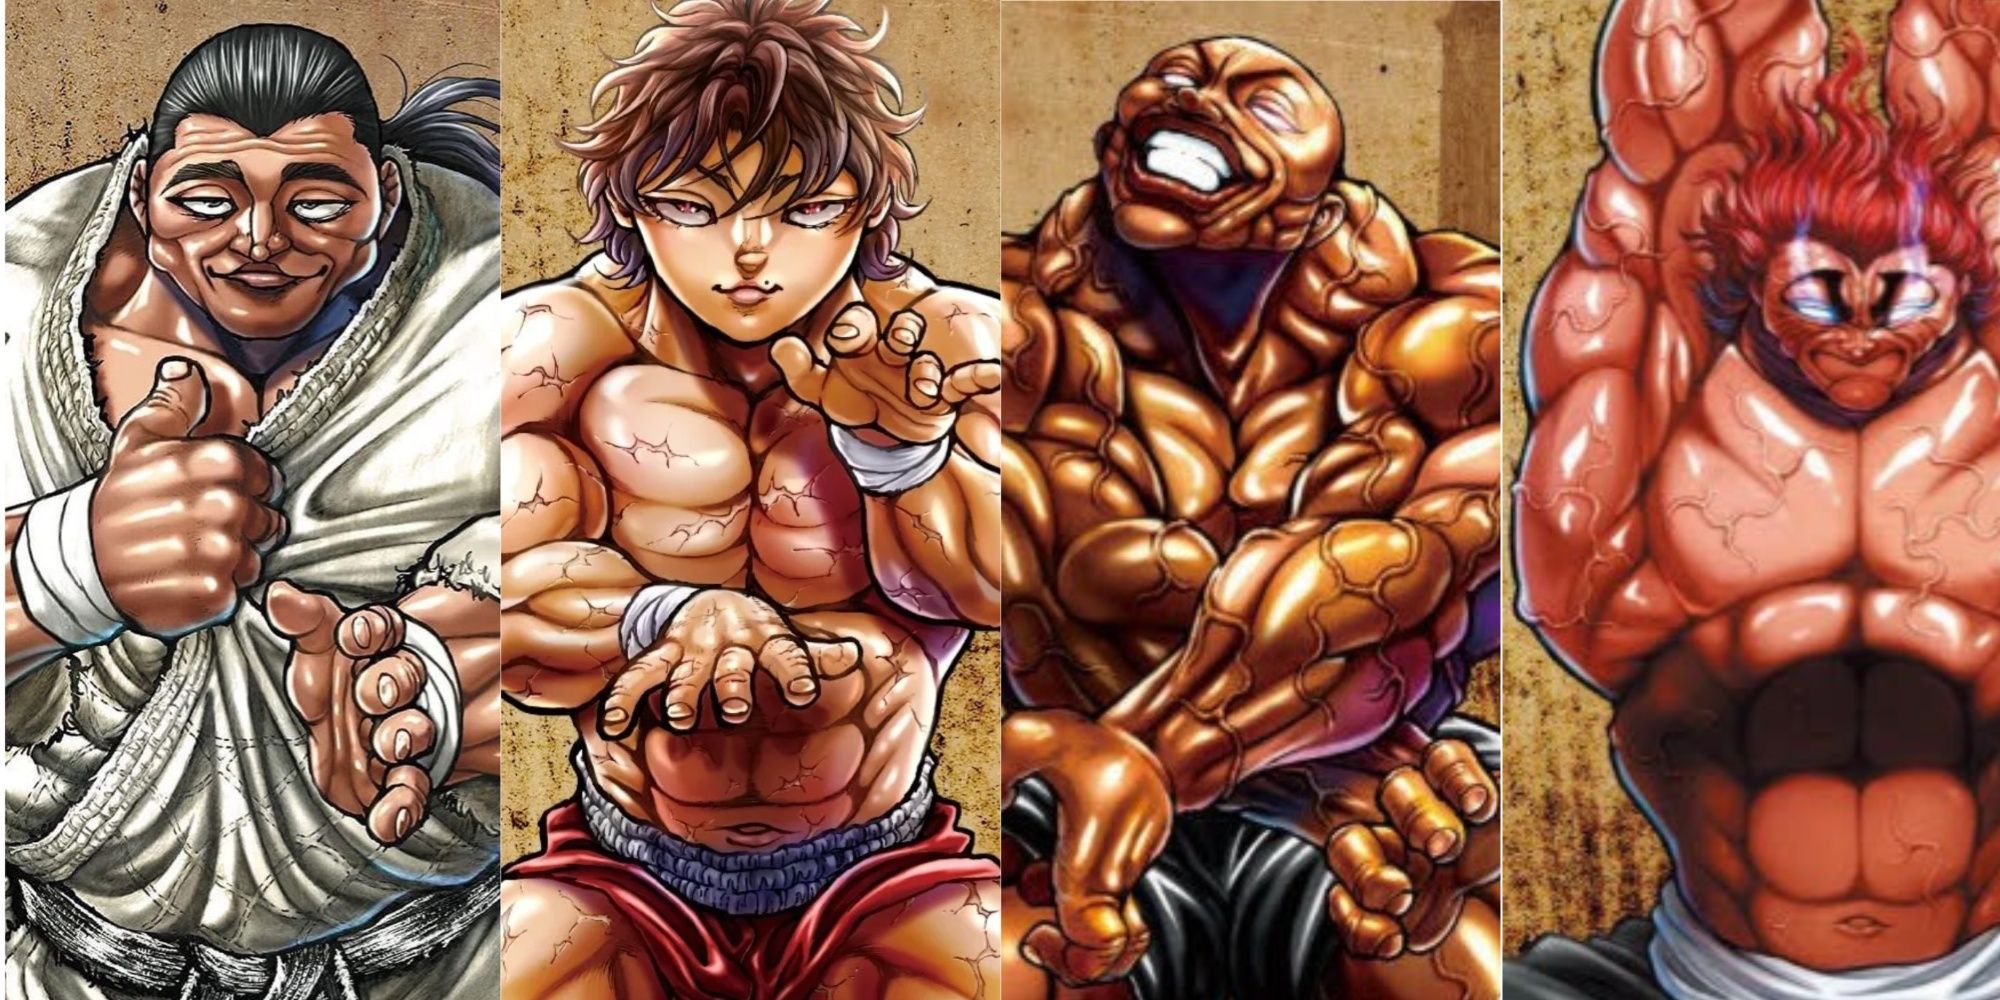 Top 10 martial arts anime to watch if you loved Baki - Dexerto